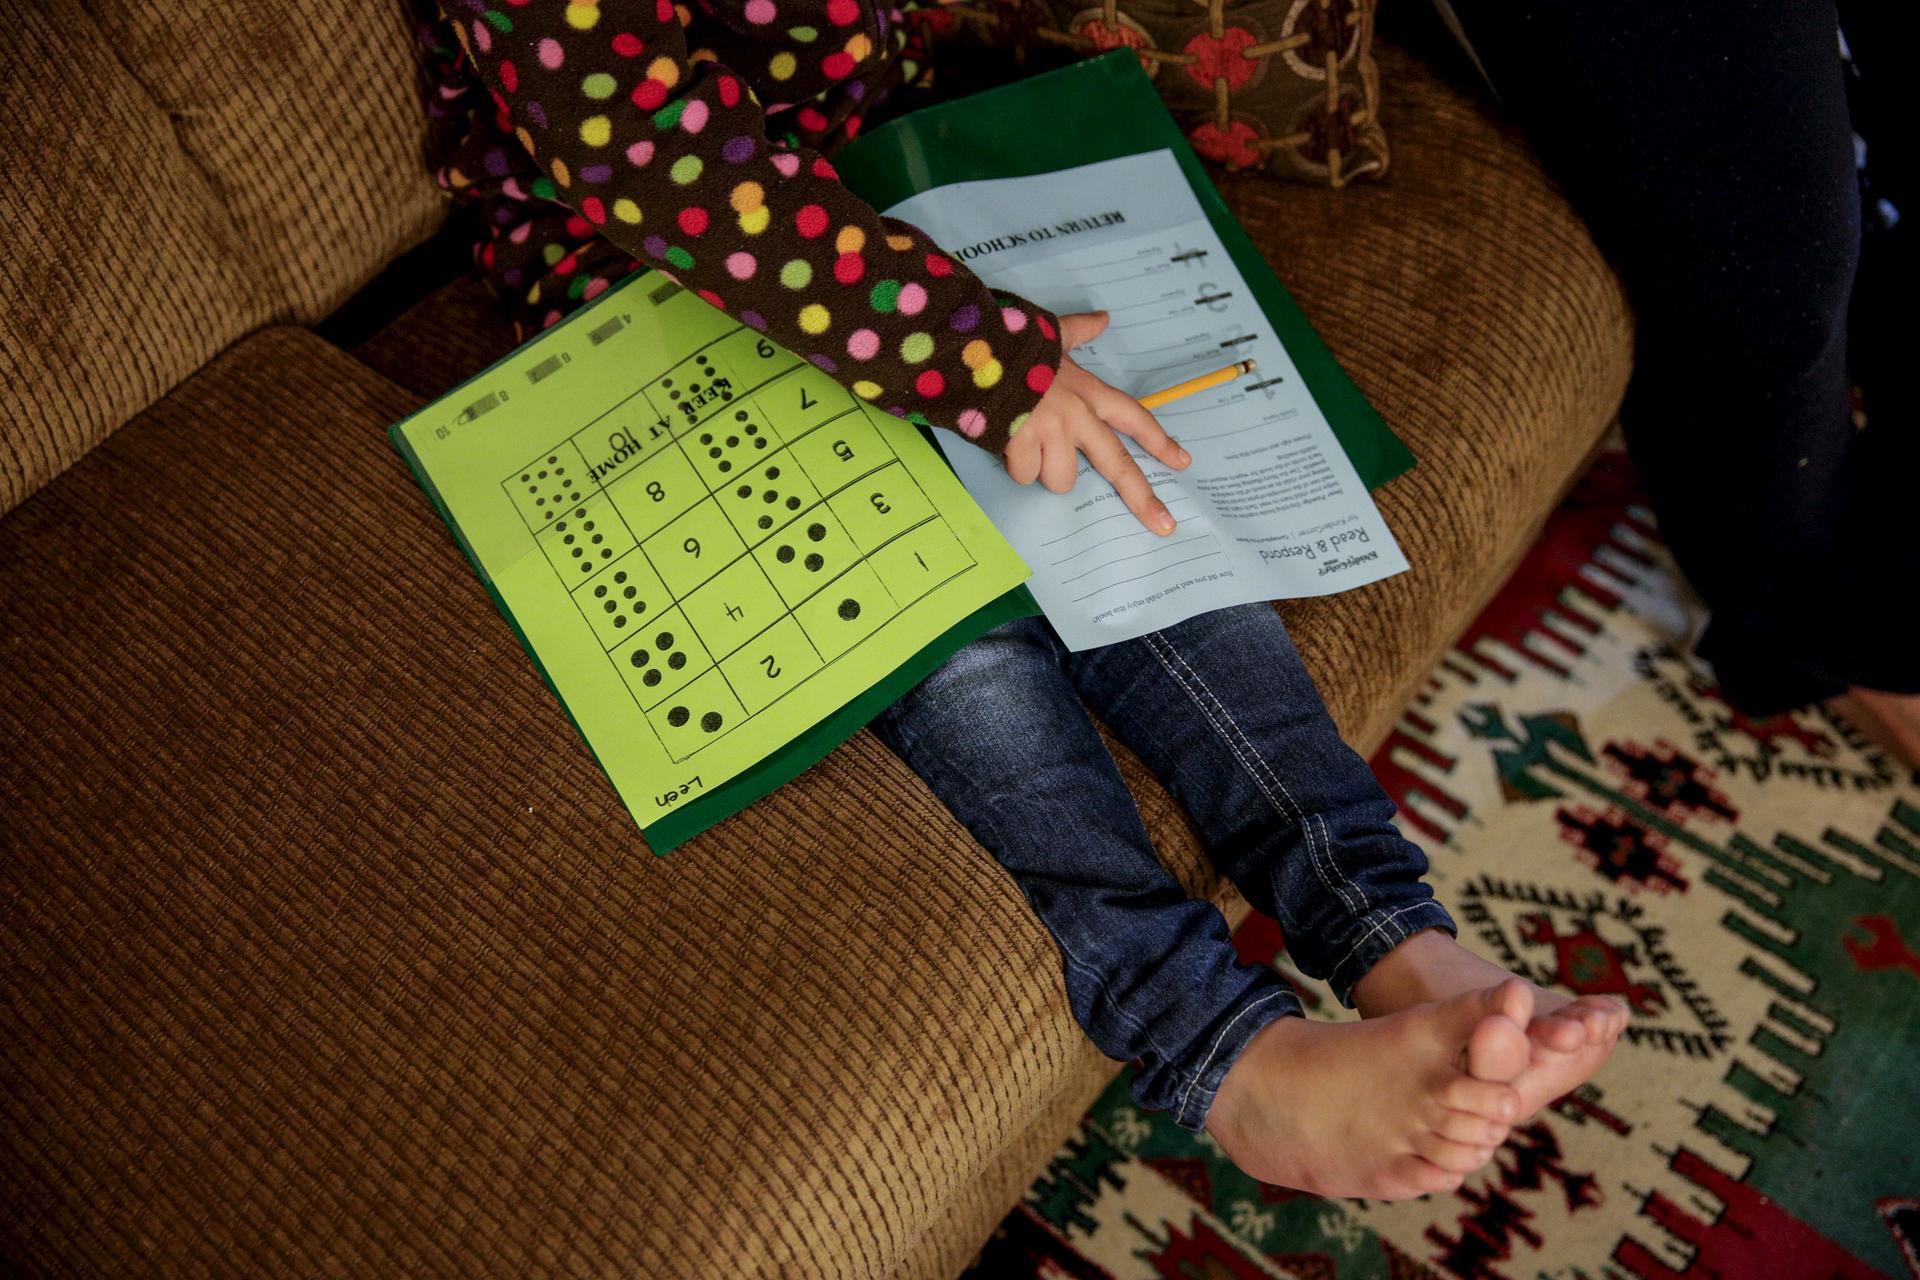 Five-year-old Syrian refugee Leen works on her homework at her new home in Sacramento, California.  Leen and her family fled violence in Syria three and a half years ago and arrived in Sacramento in September 2015 after living in Jordan. Her face is exclu